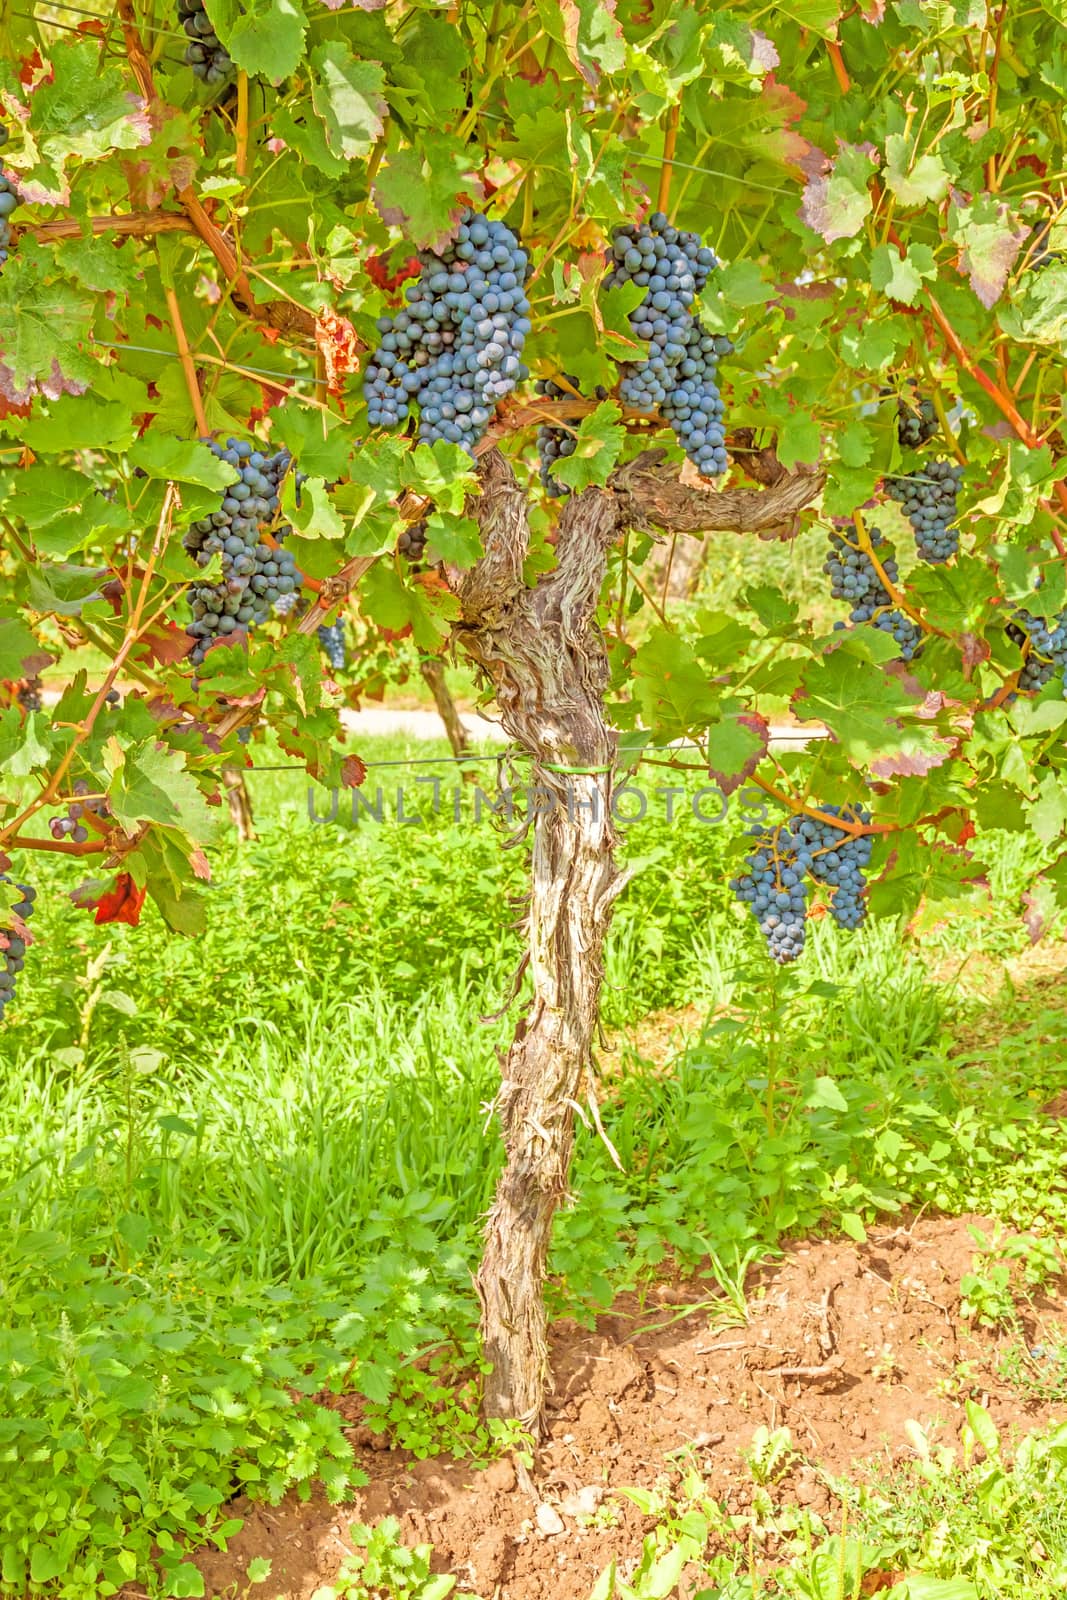 Single vine stock with blue / red bunches of grapes